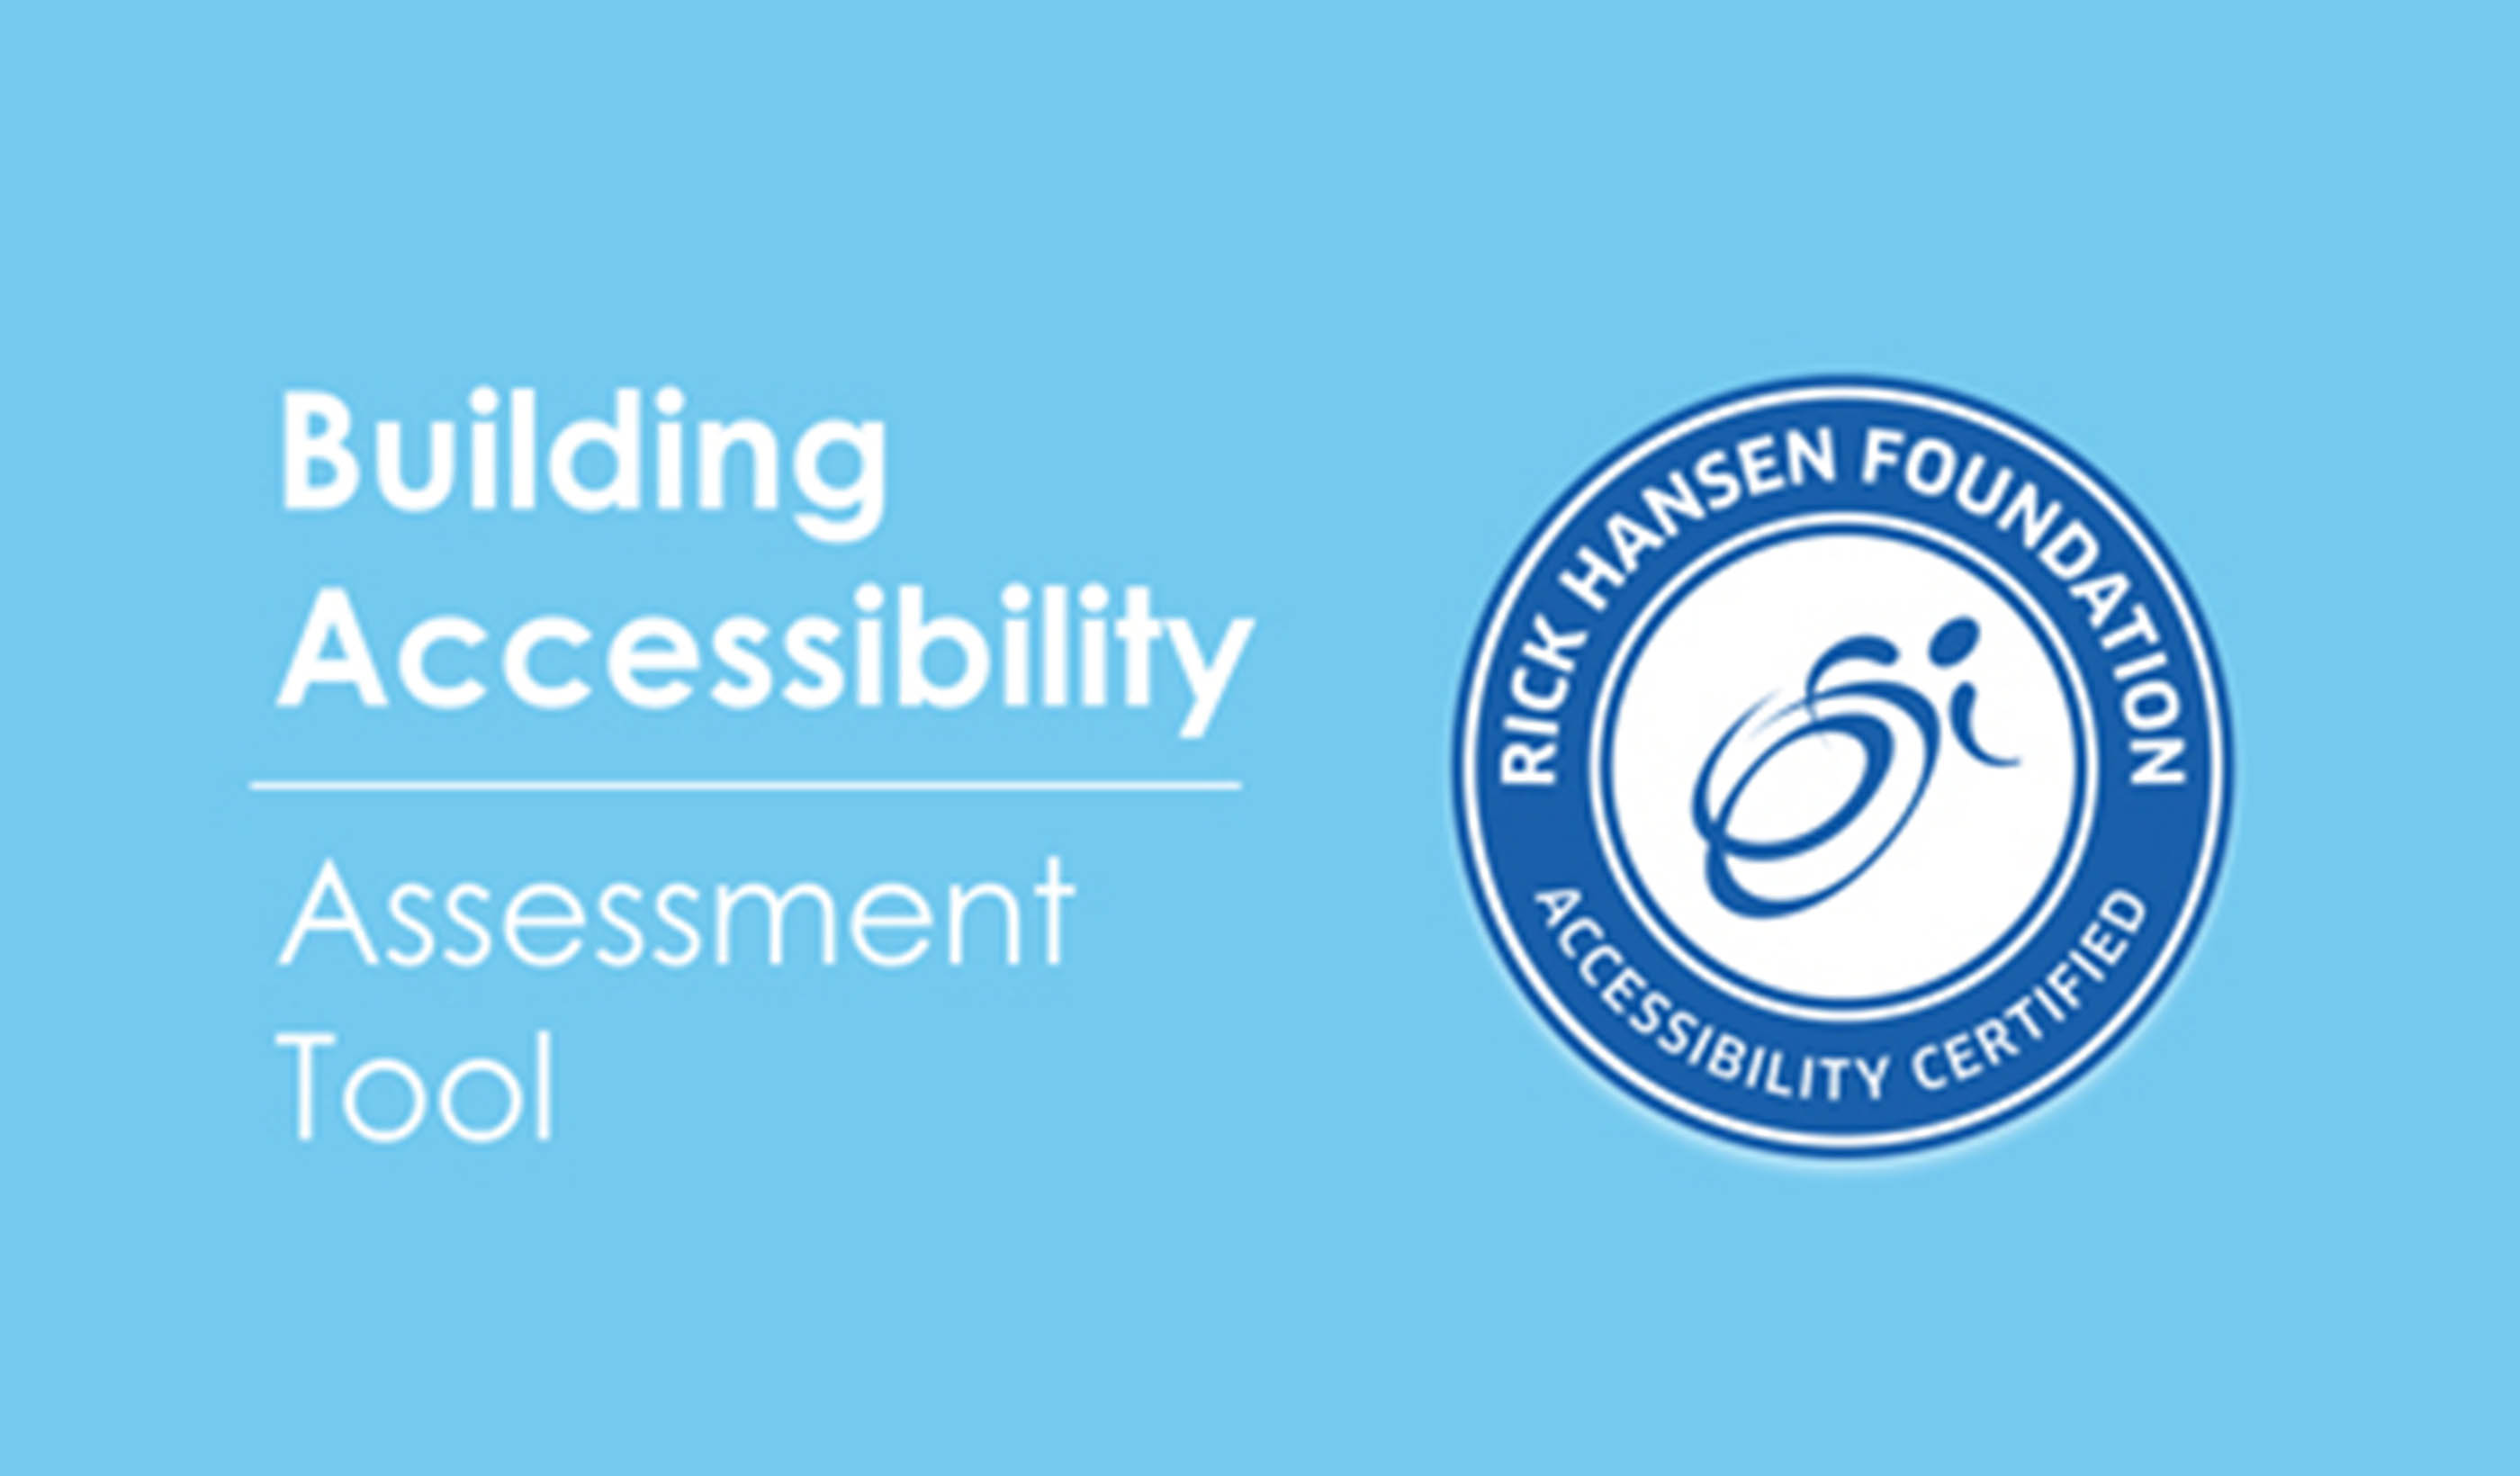 What is Canada’s 1st accessibility assessment tool?